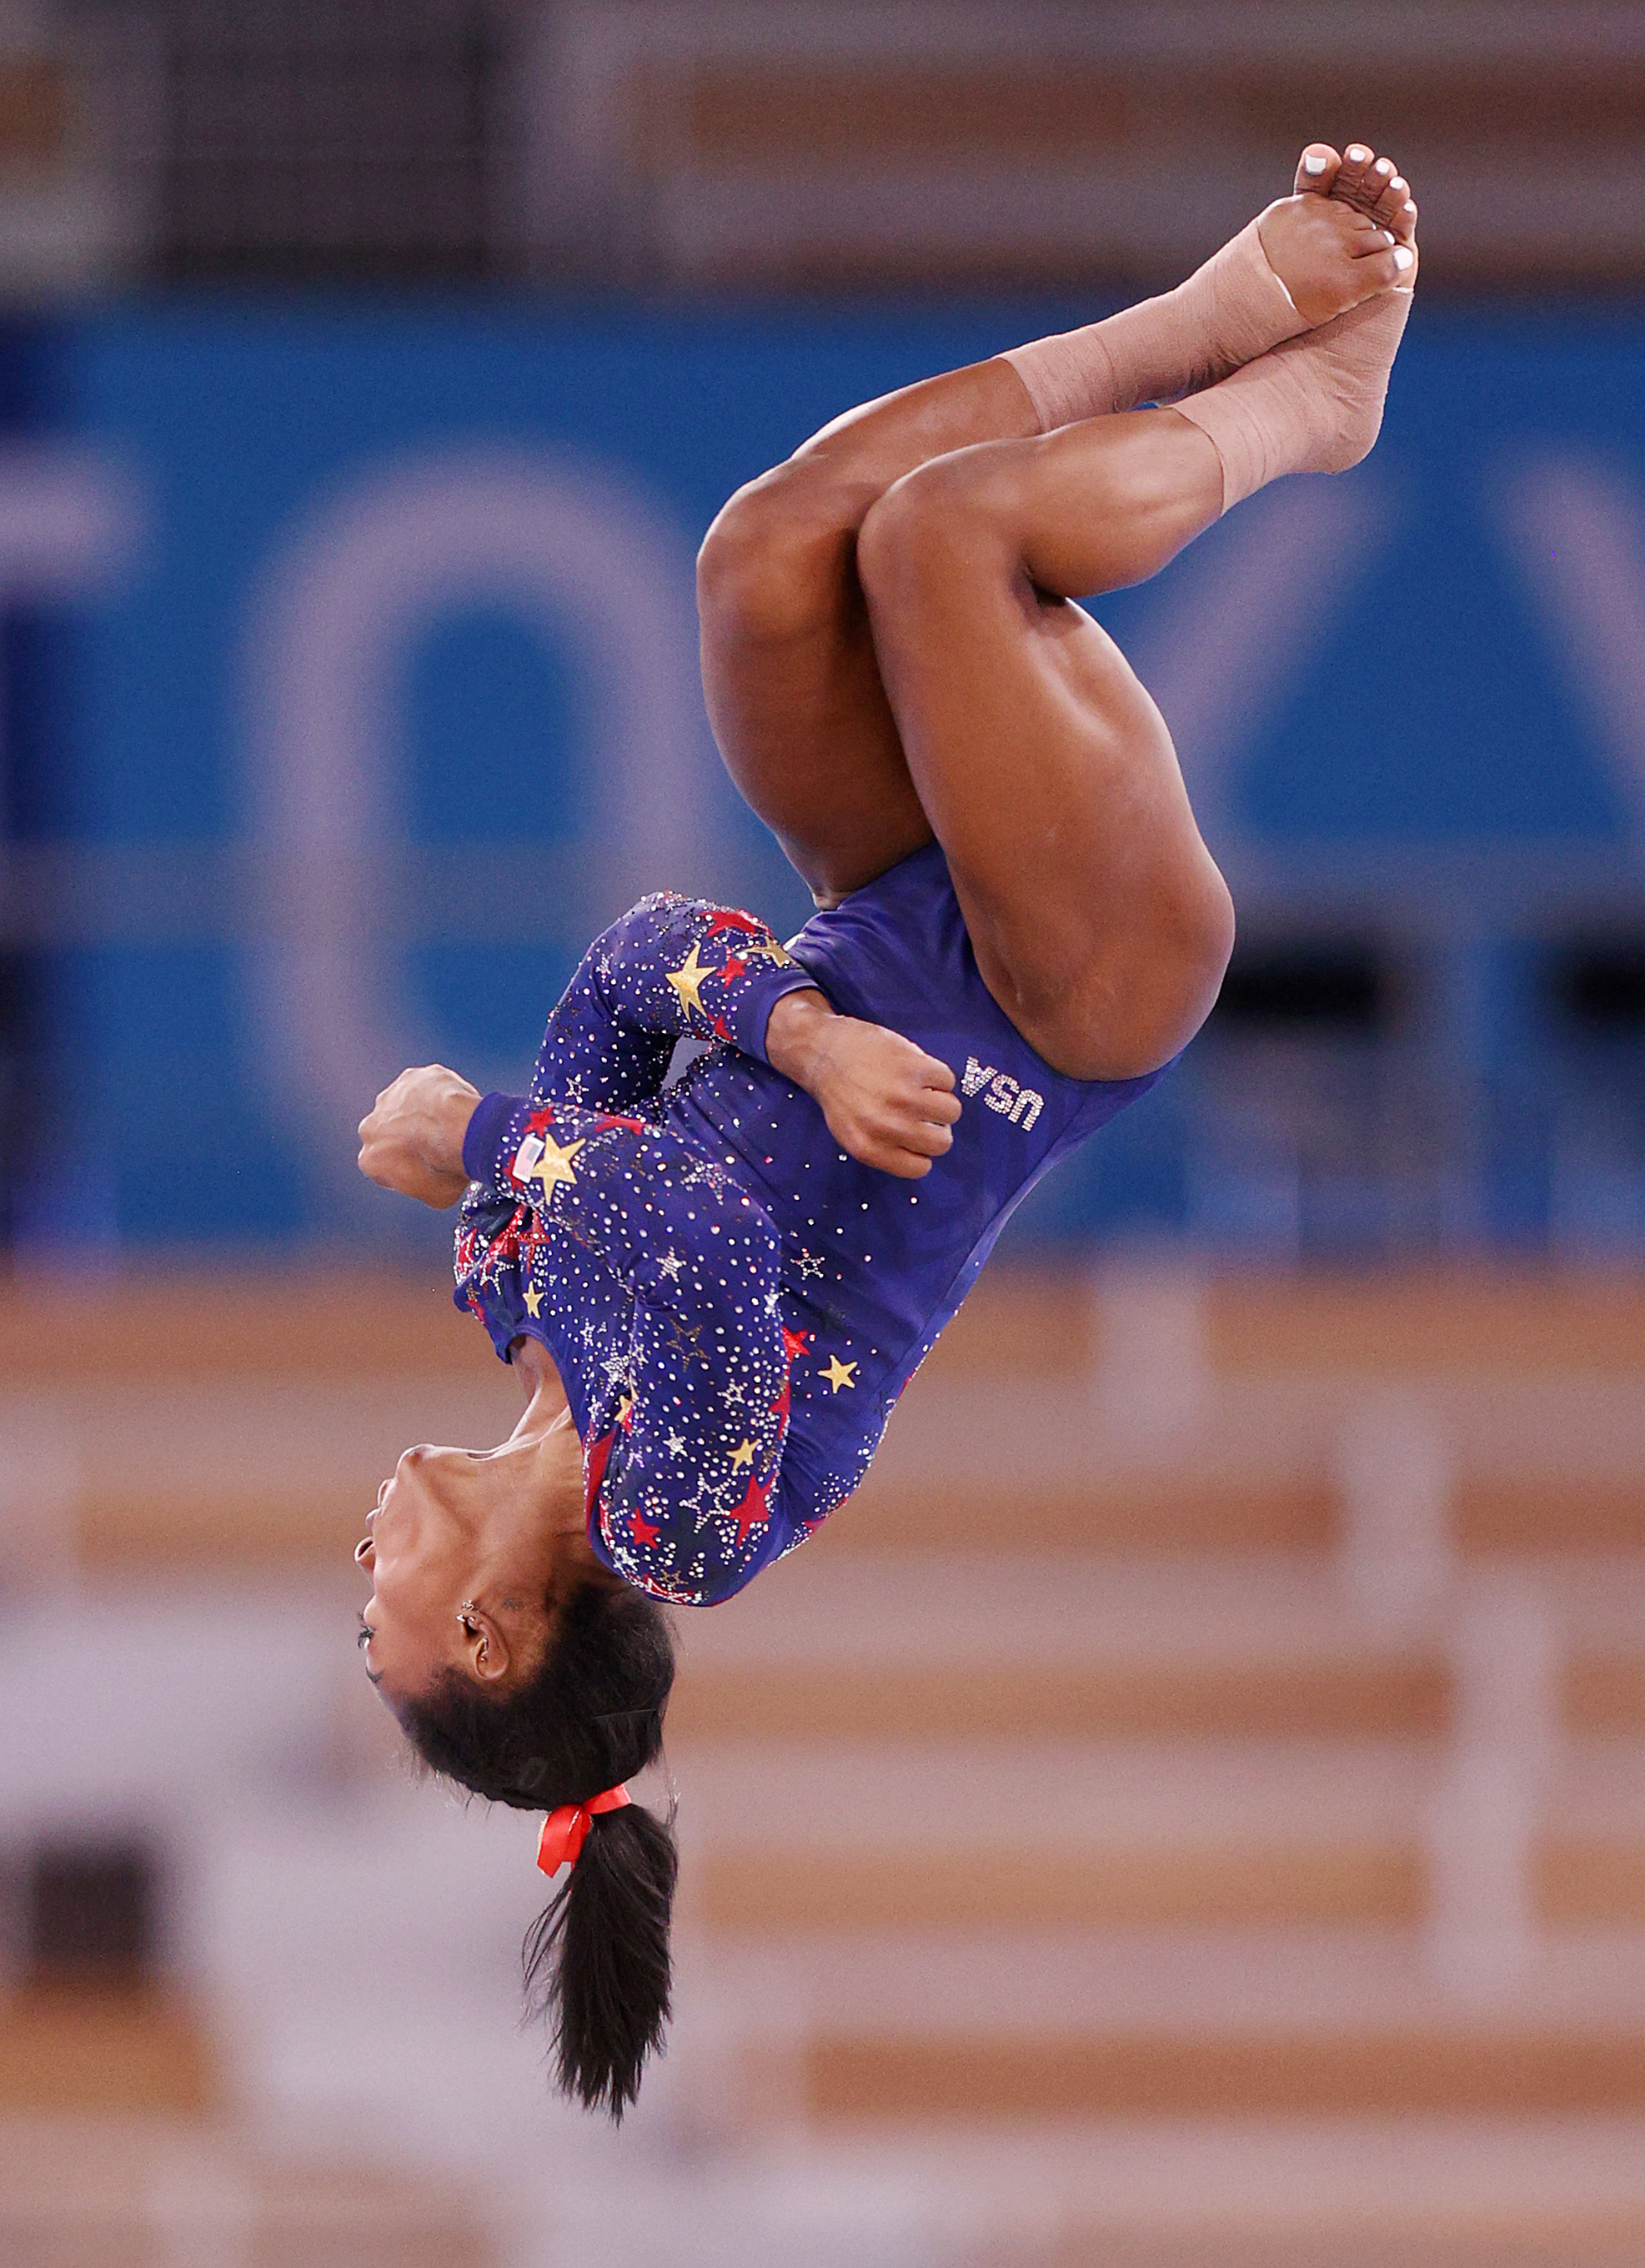 American gymnast Simone Biles competes at the Tokyo 2020 Olympic Games on July 25, 2021 (Ezra Shaw—Getty Images)